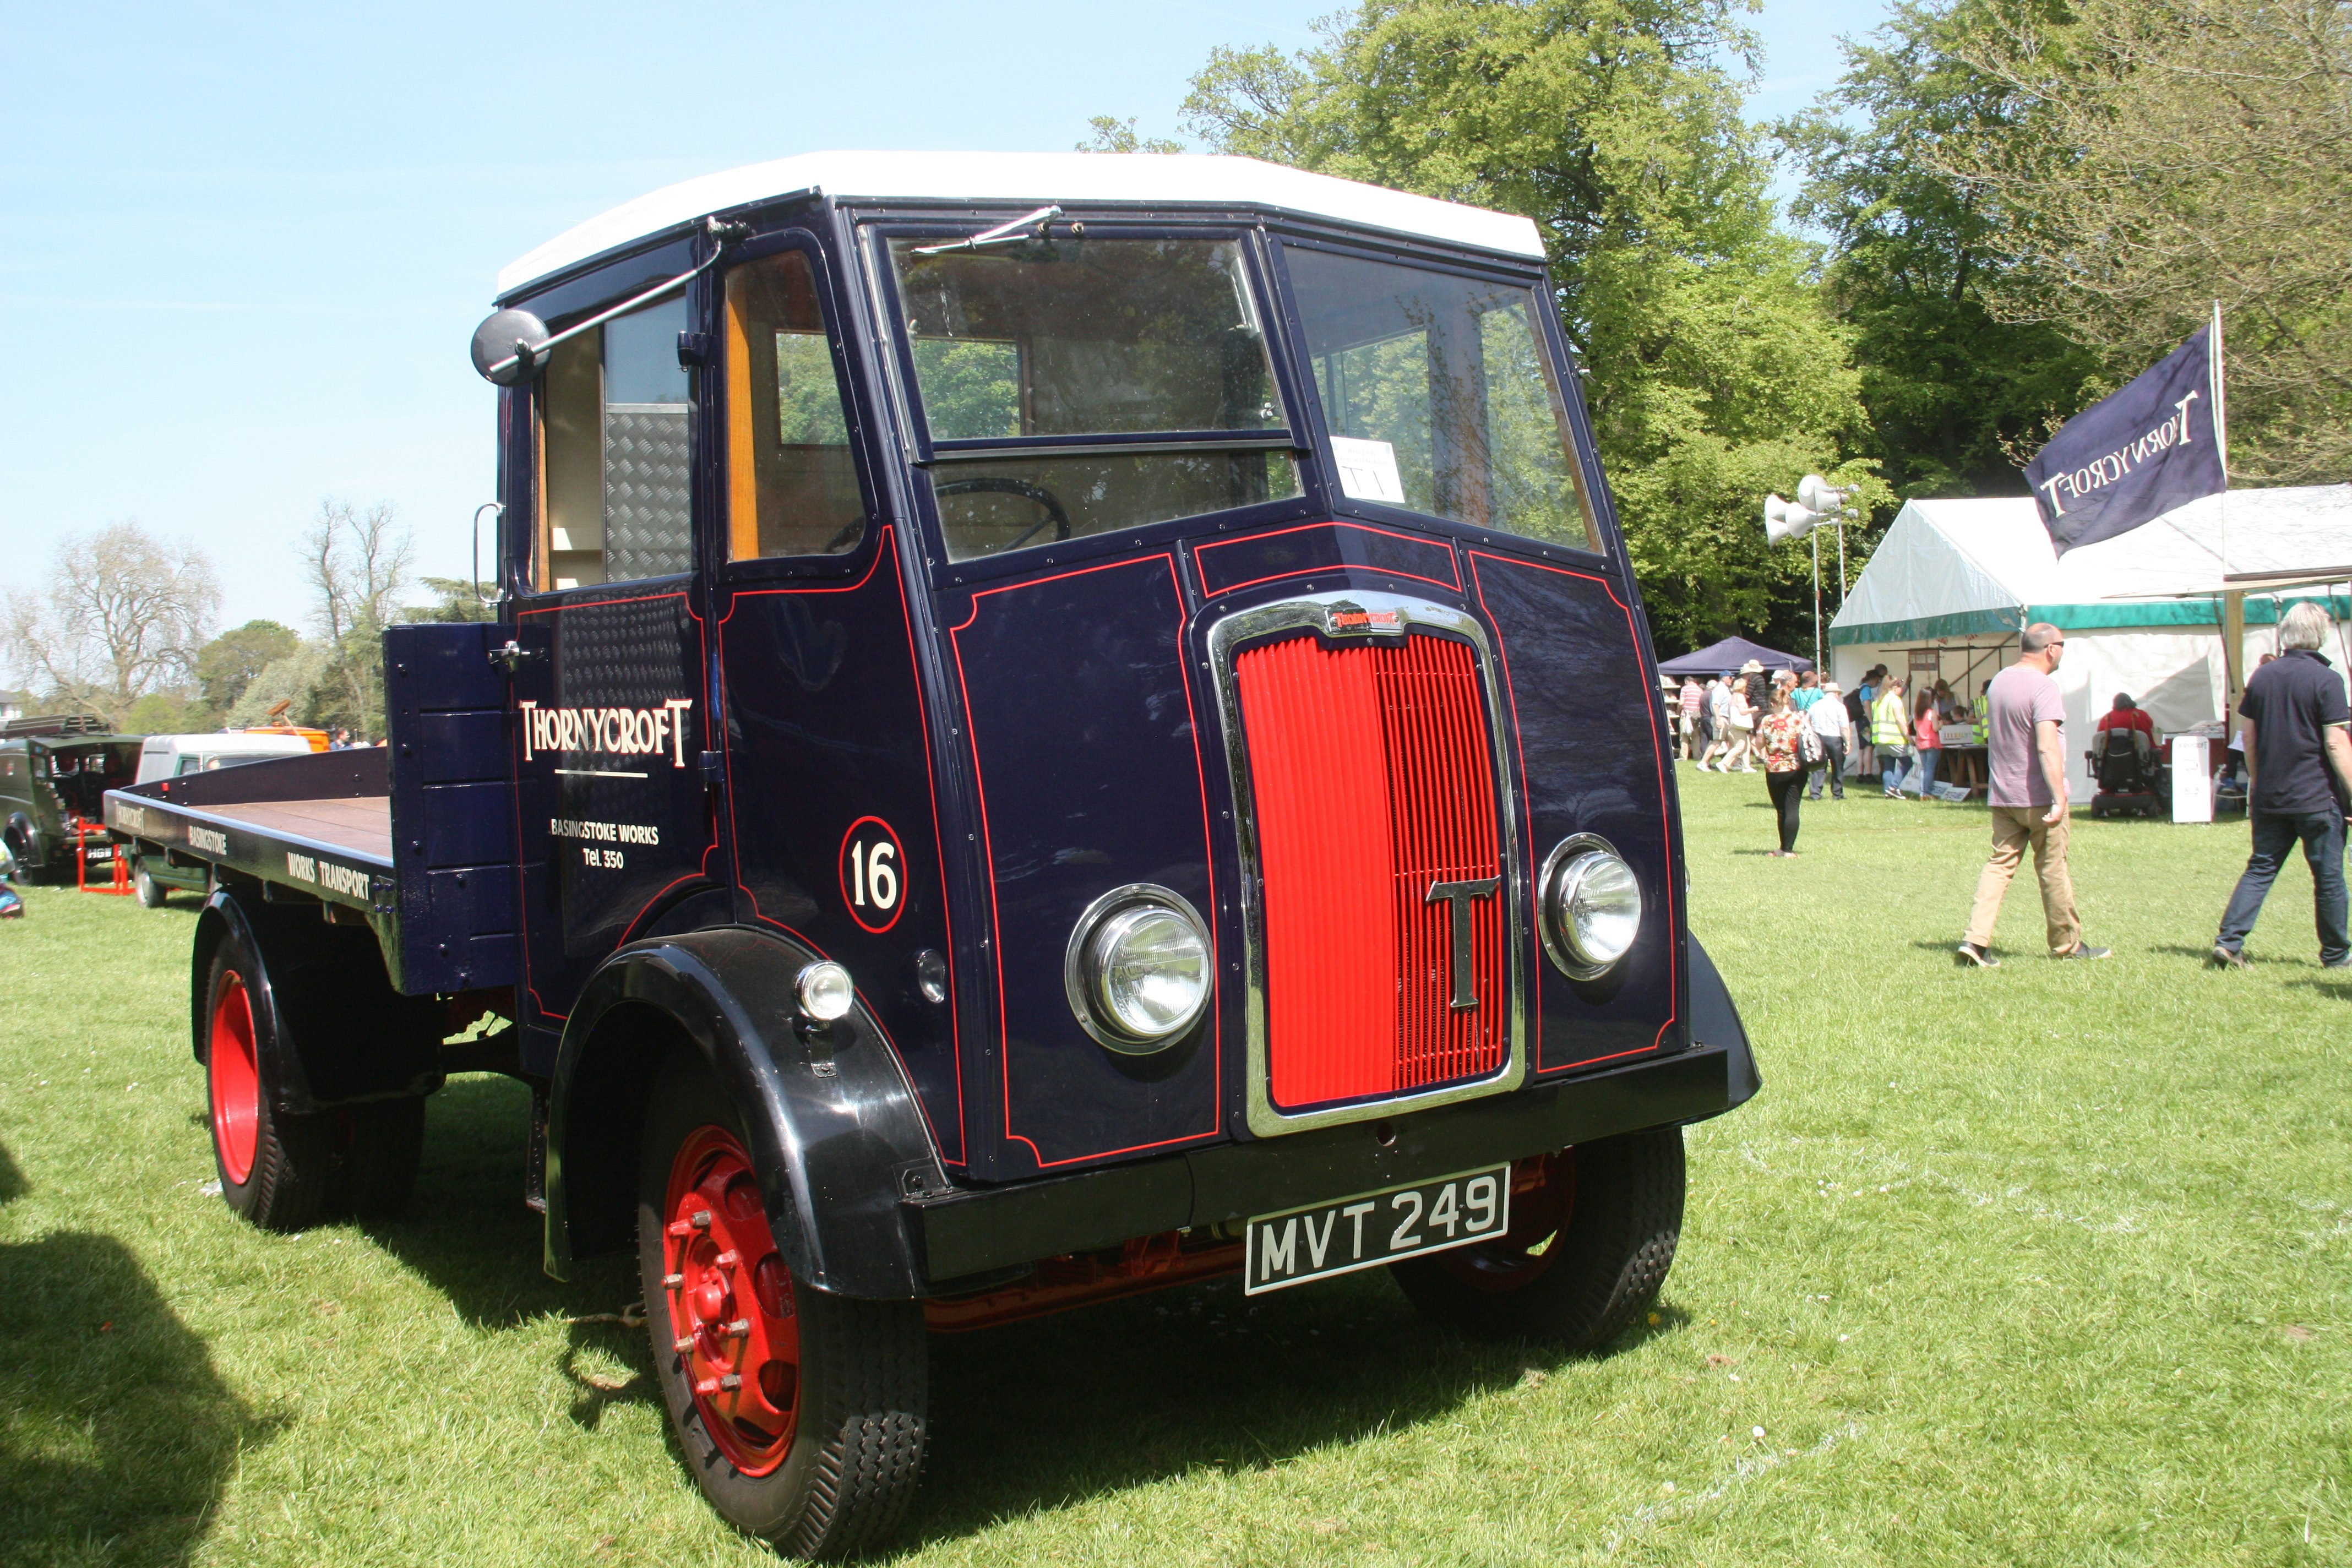 A vintage vehicle is the highlight of the image. Navy in colour with a red grill, displaying the words Thorneycroft in white.